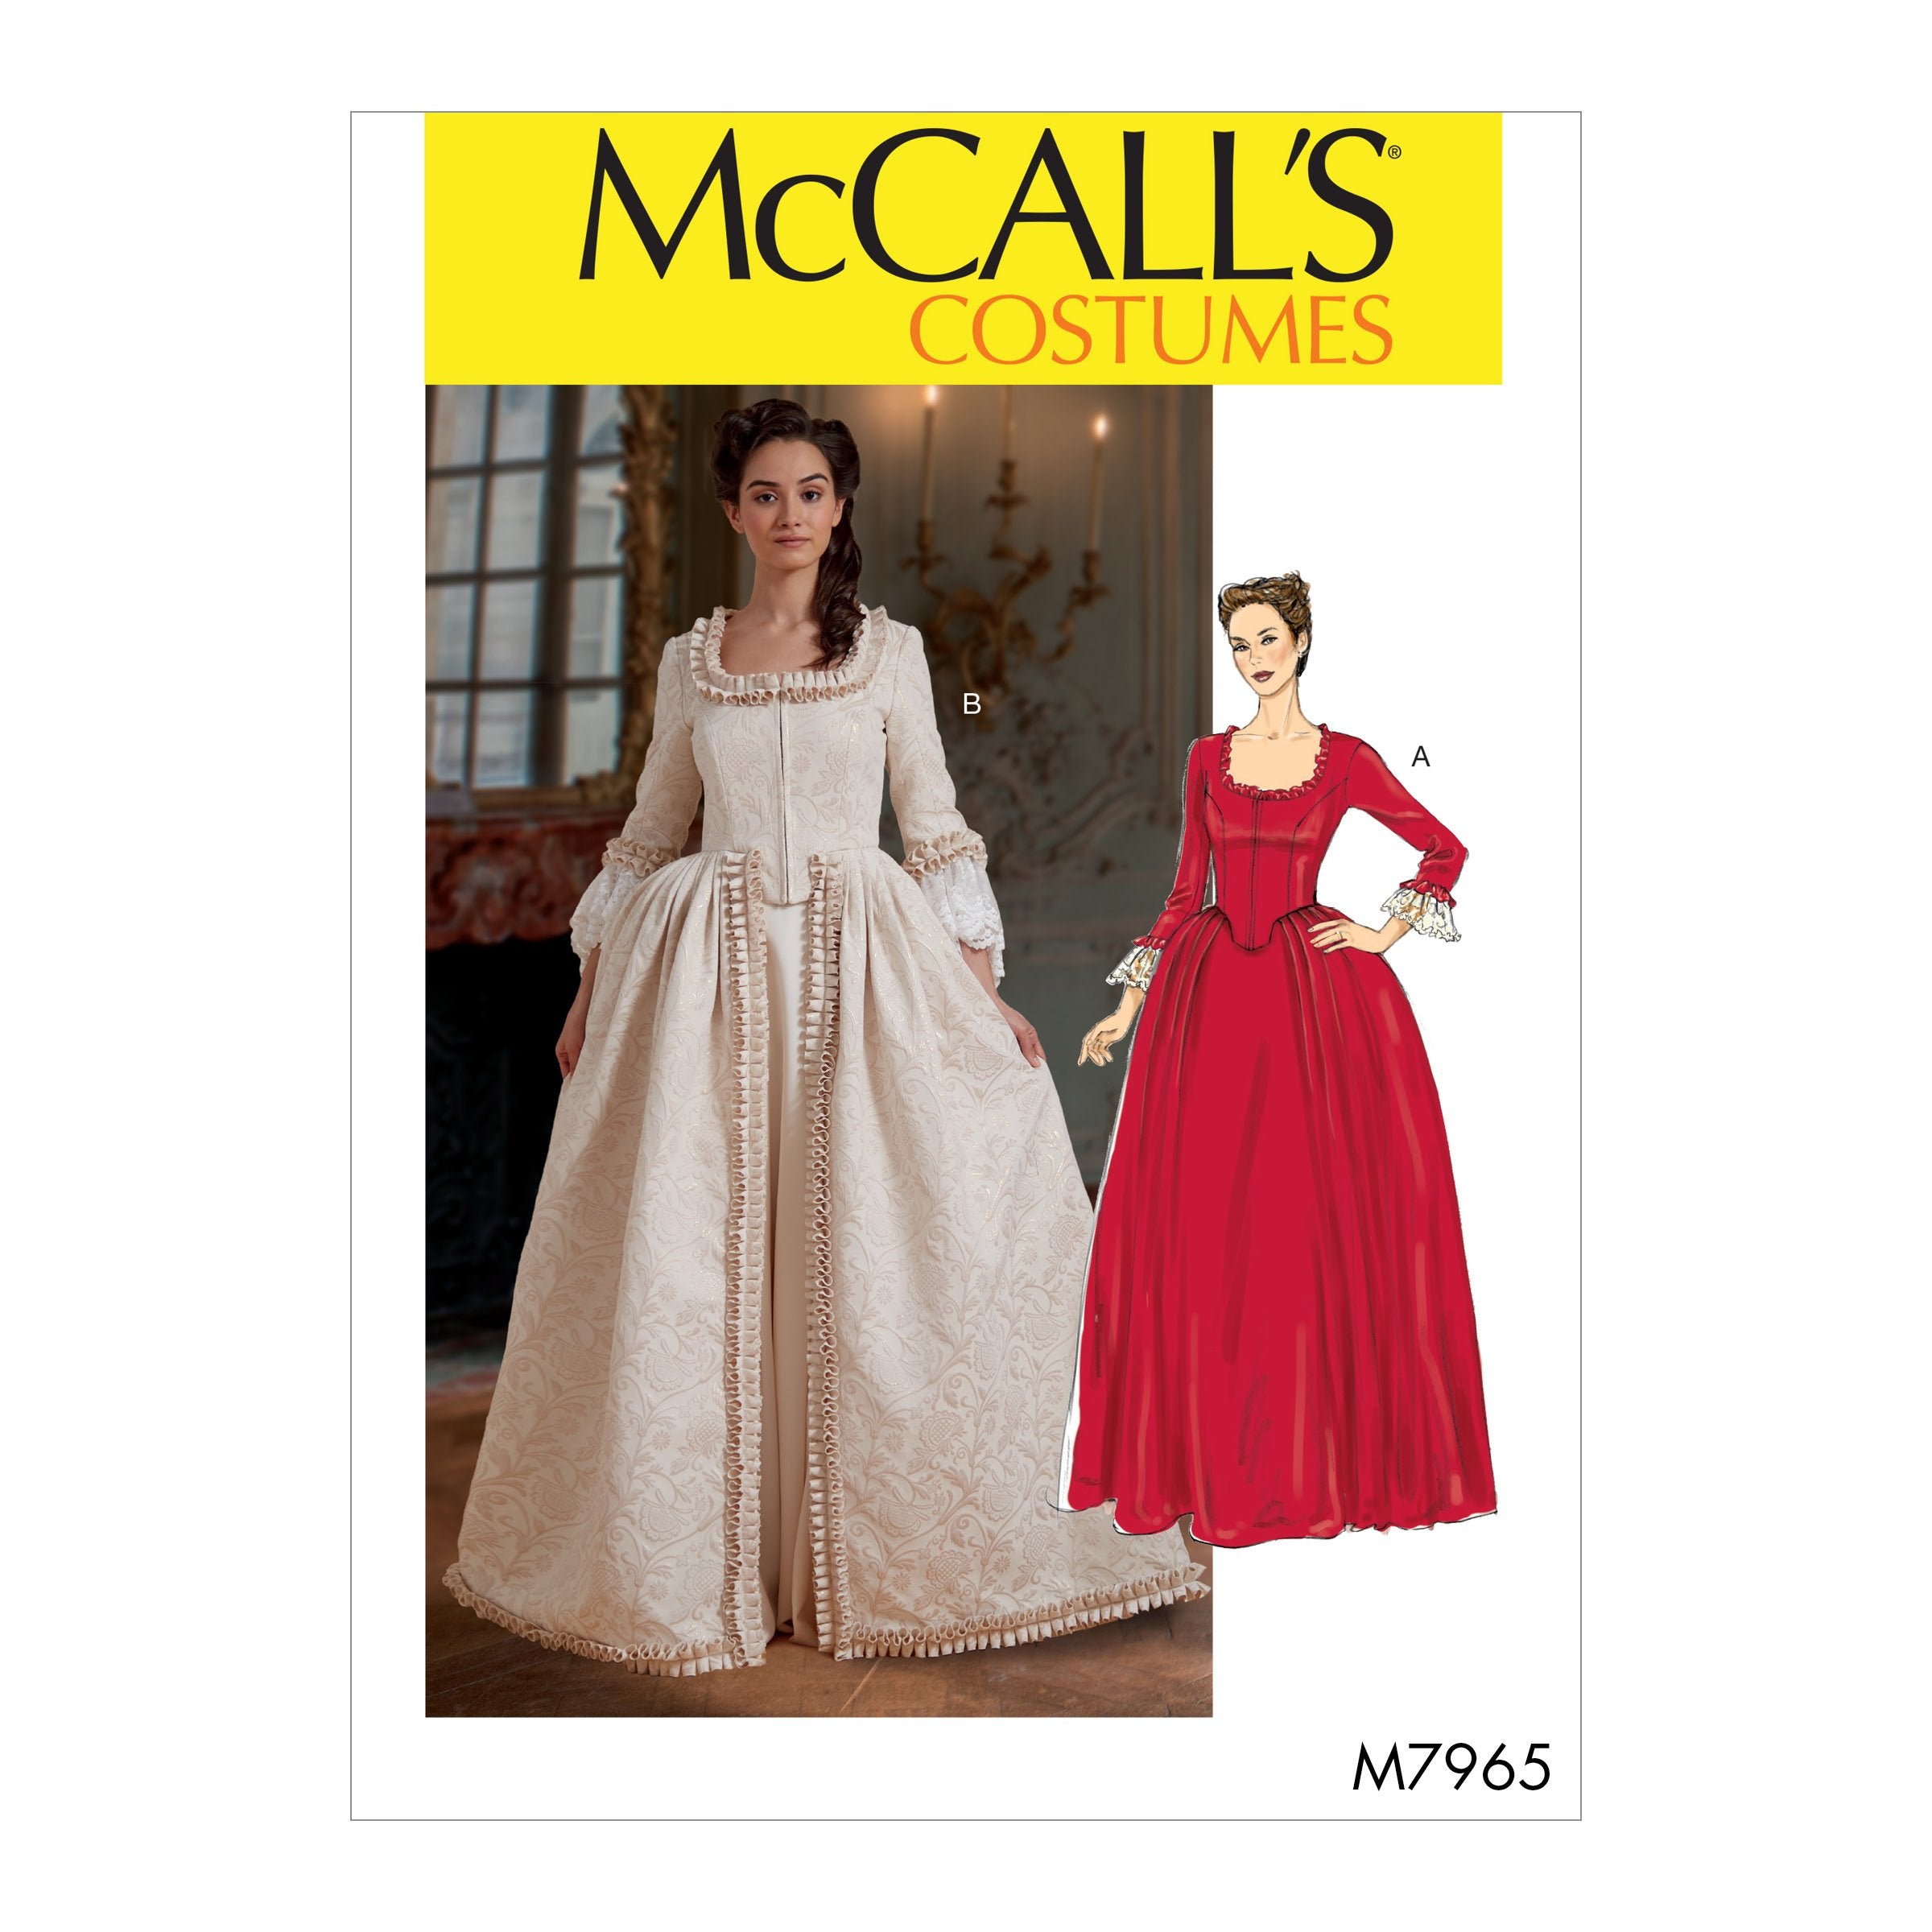 McCalls 7965 Misses' Costume sewing pattern from Jaycotts Sewing Supplies